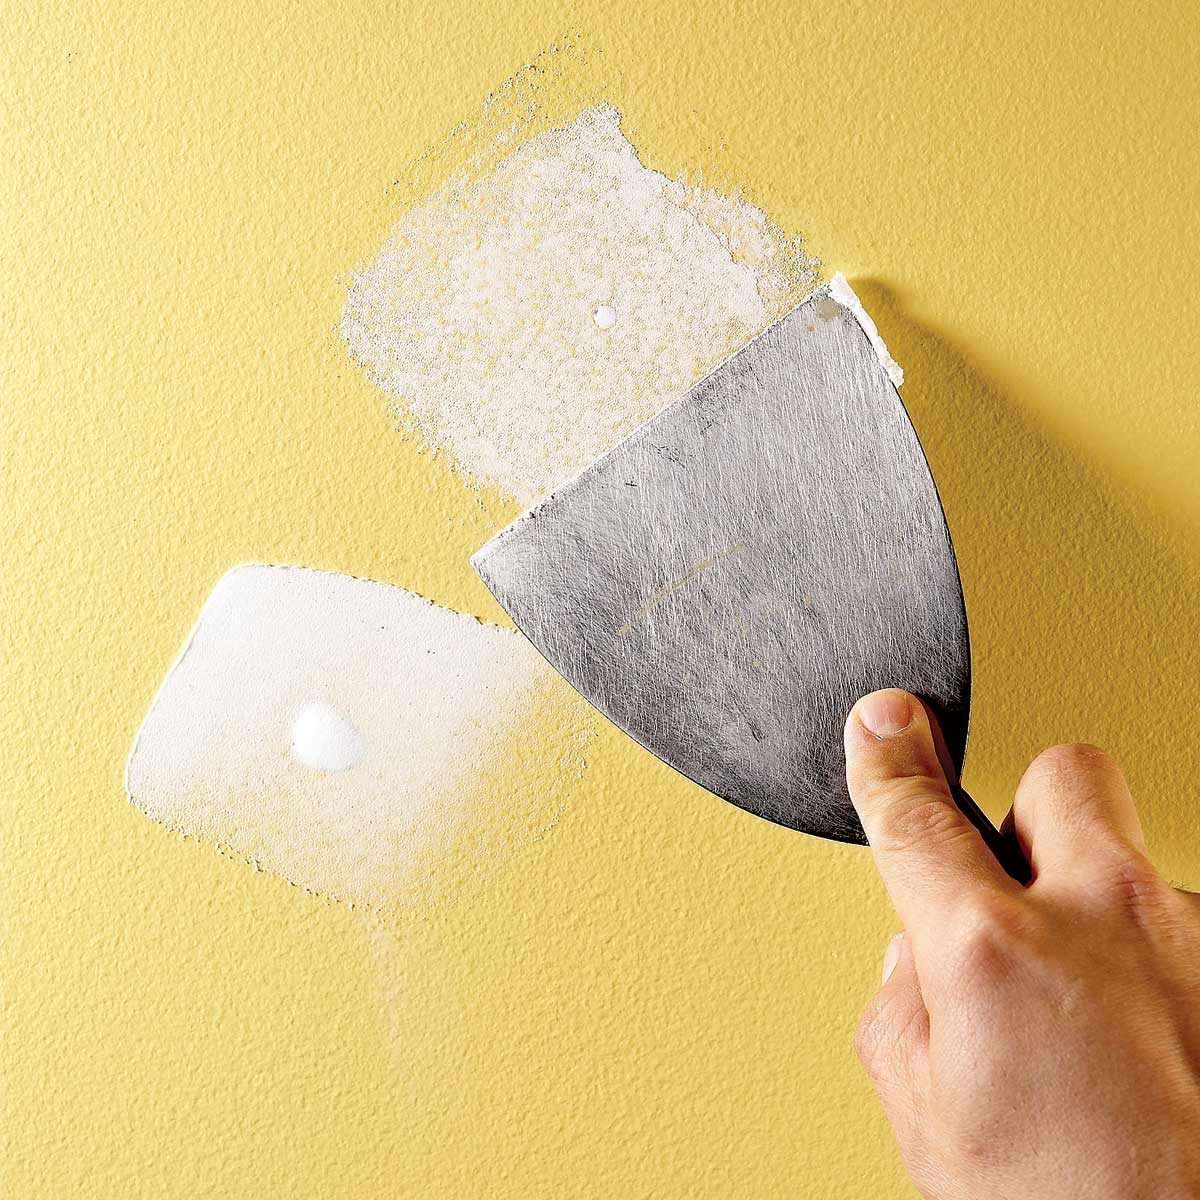 How To Fill Nail Holes In Drywall Before Painting